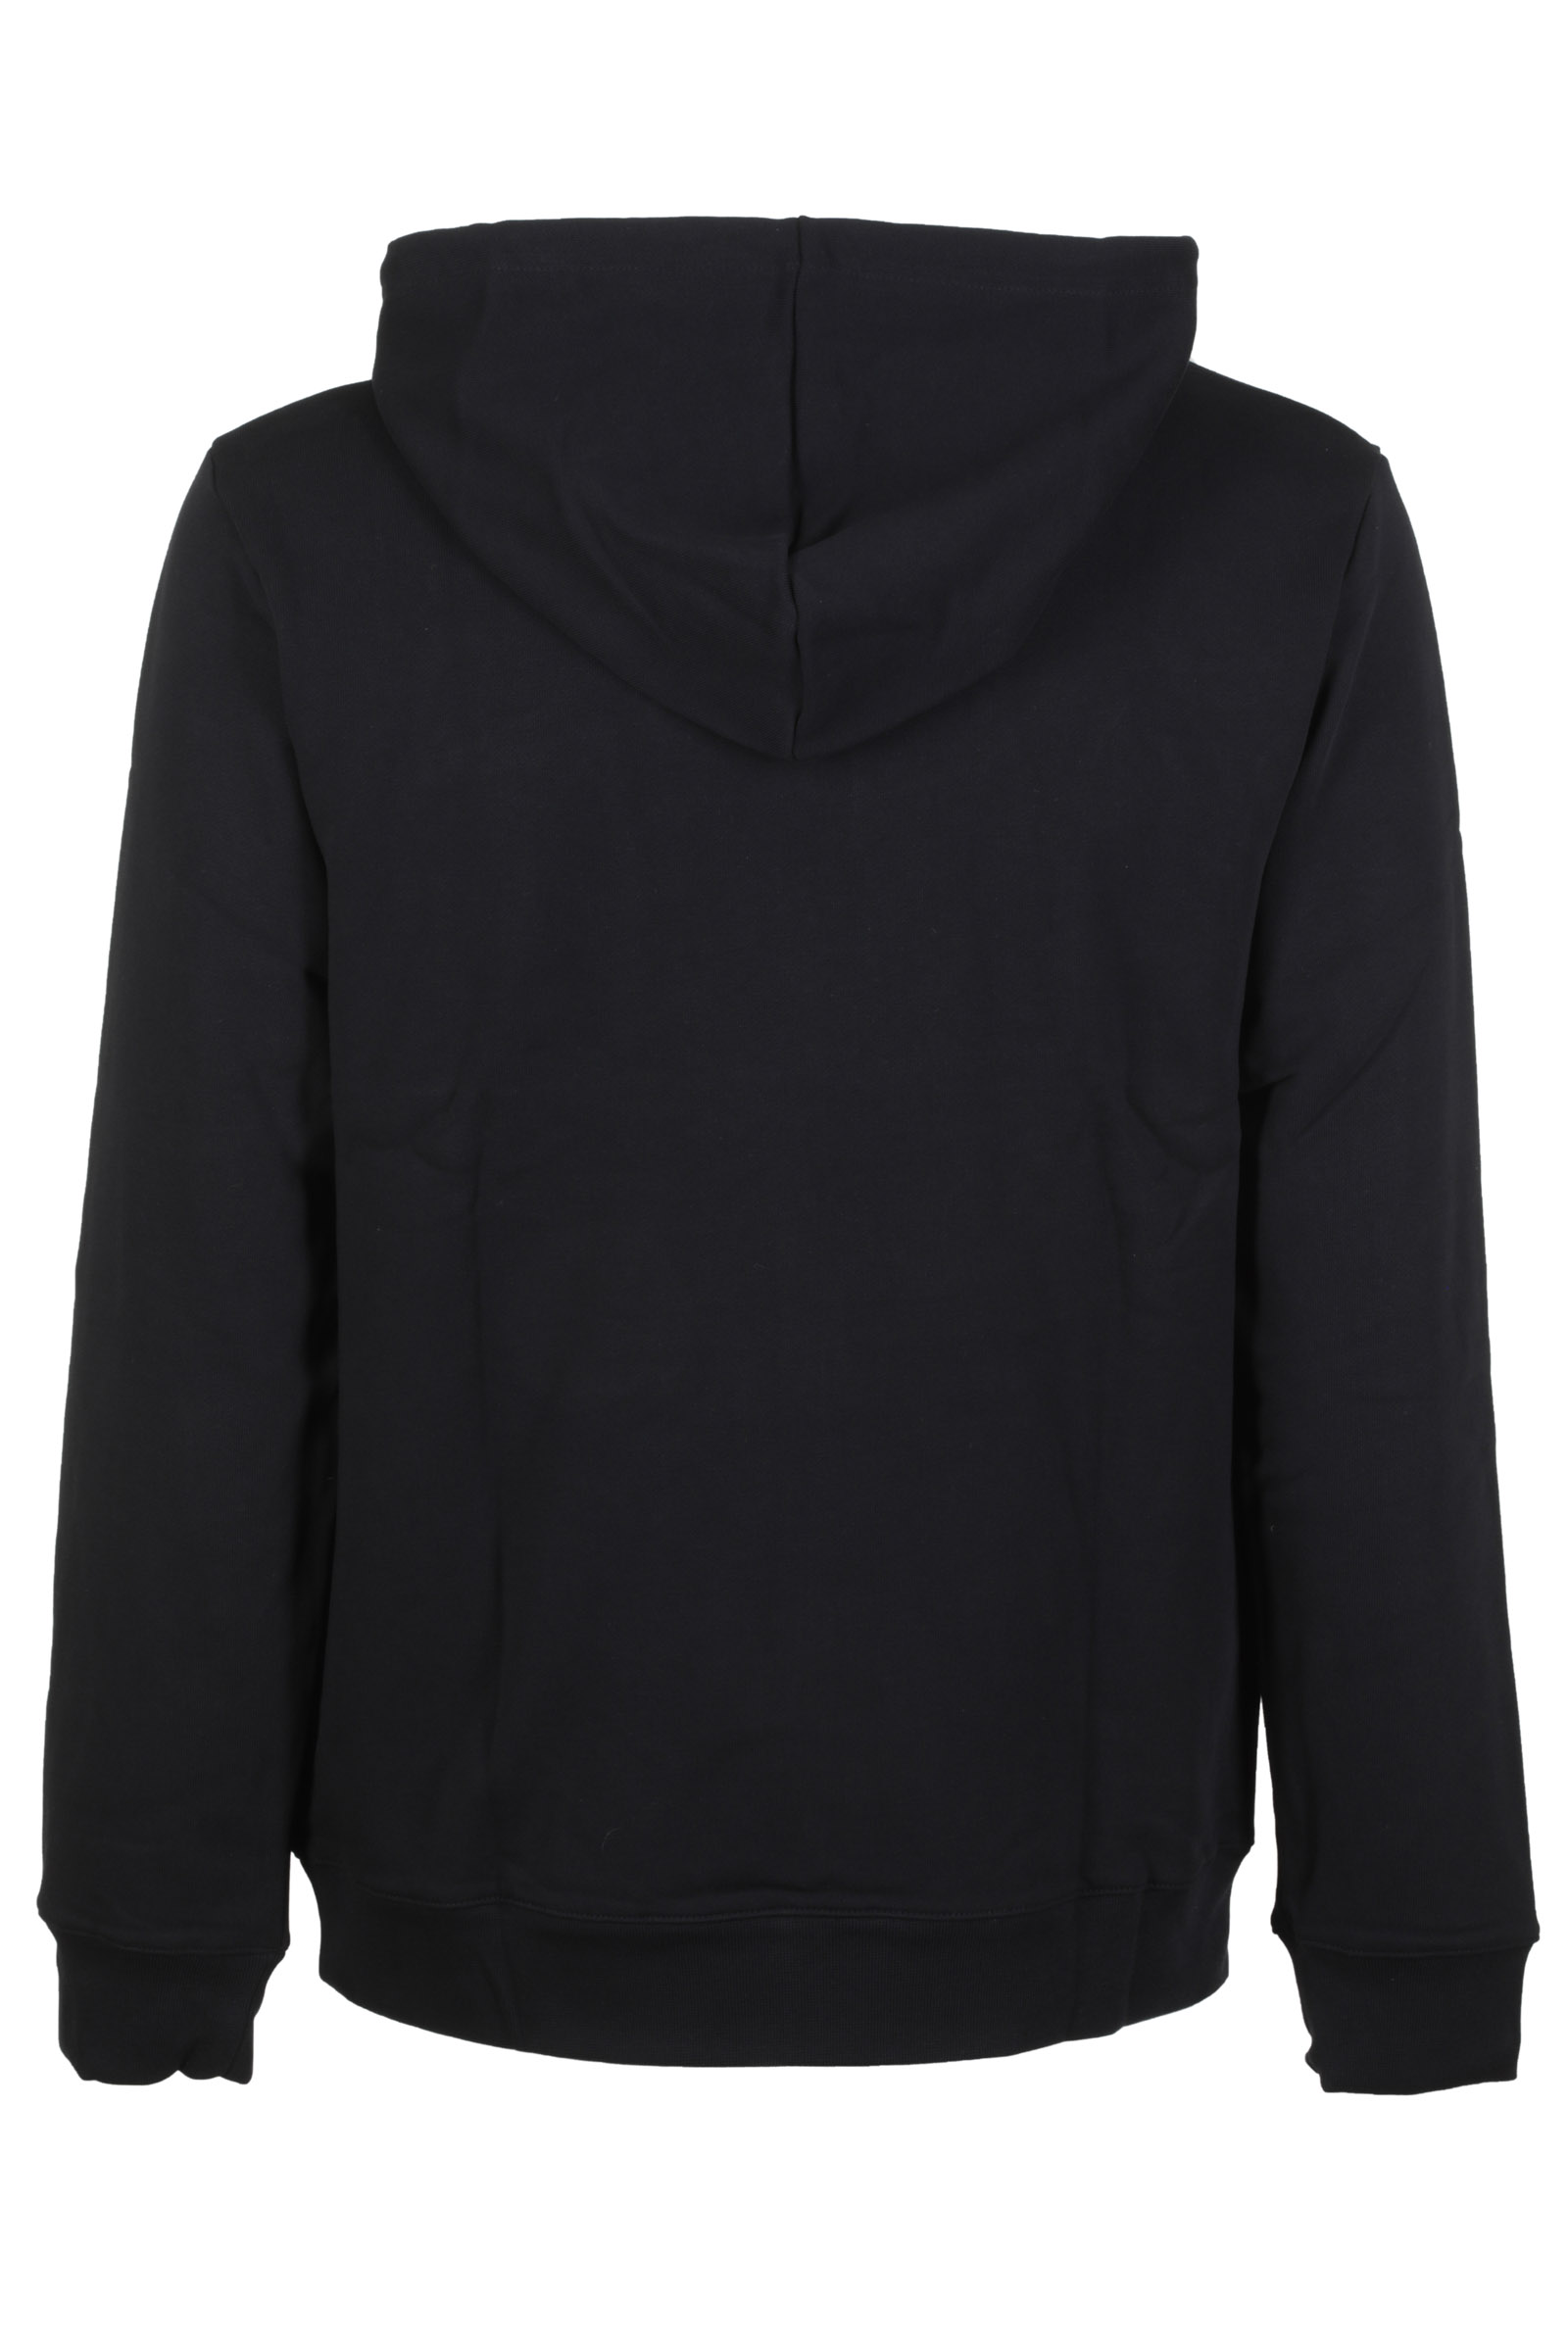 Picture of A.P.C. | Hoodie Marvin